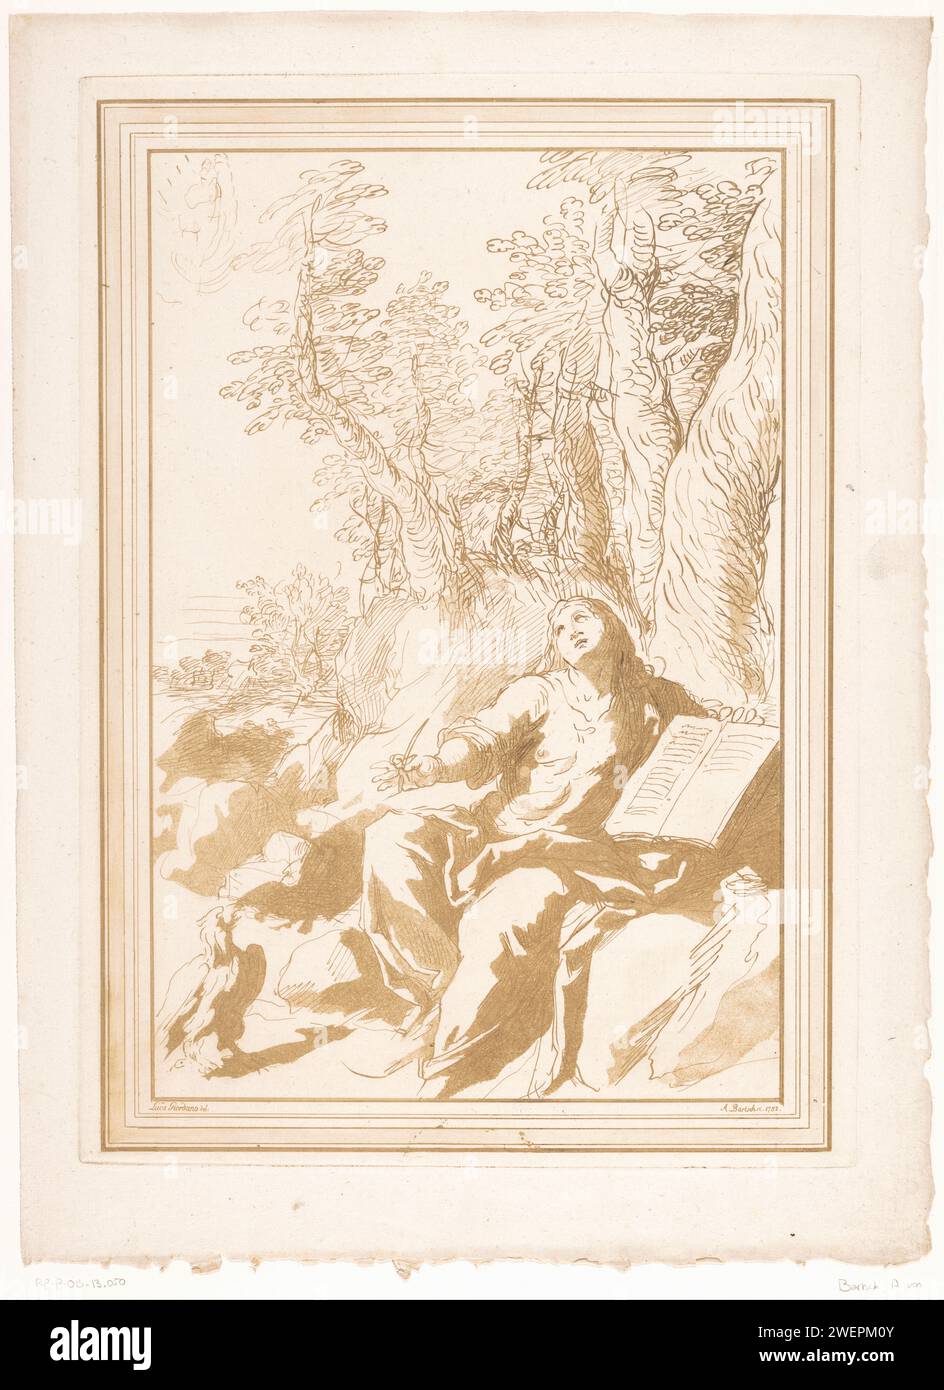 Johannes de Evangelist OP Patmos, Adam von Bartsch, After Jacopo Palma (the young), after Luca Giordano, 1782 print   paper etching John (writing) on the island of Patmos, possibly the eagle beside him Stock Photo